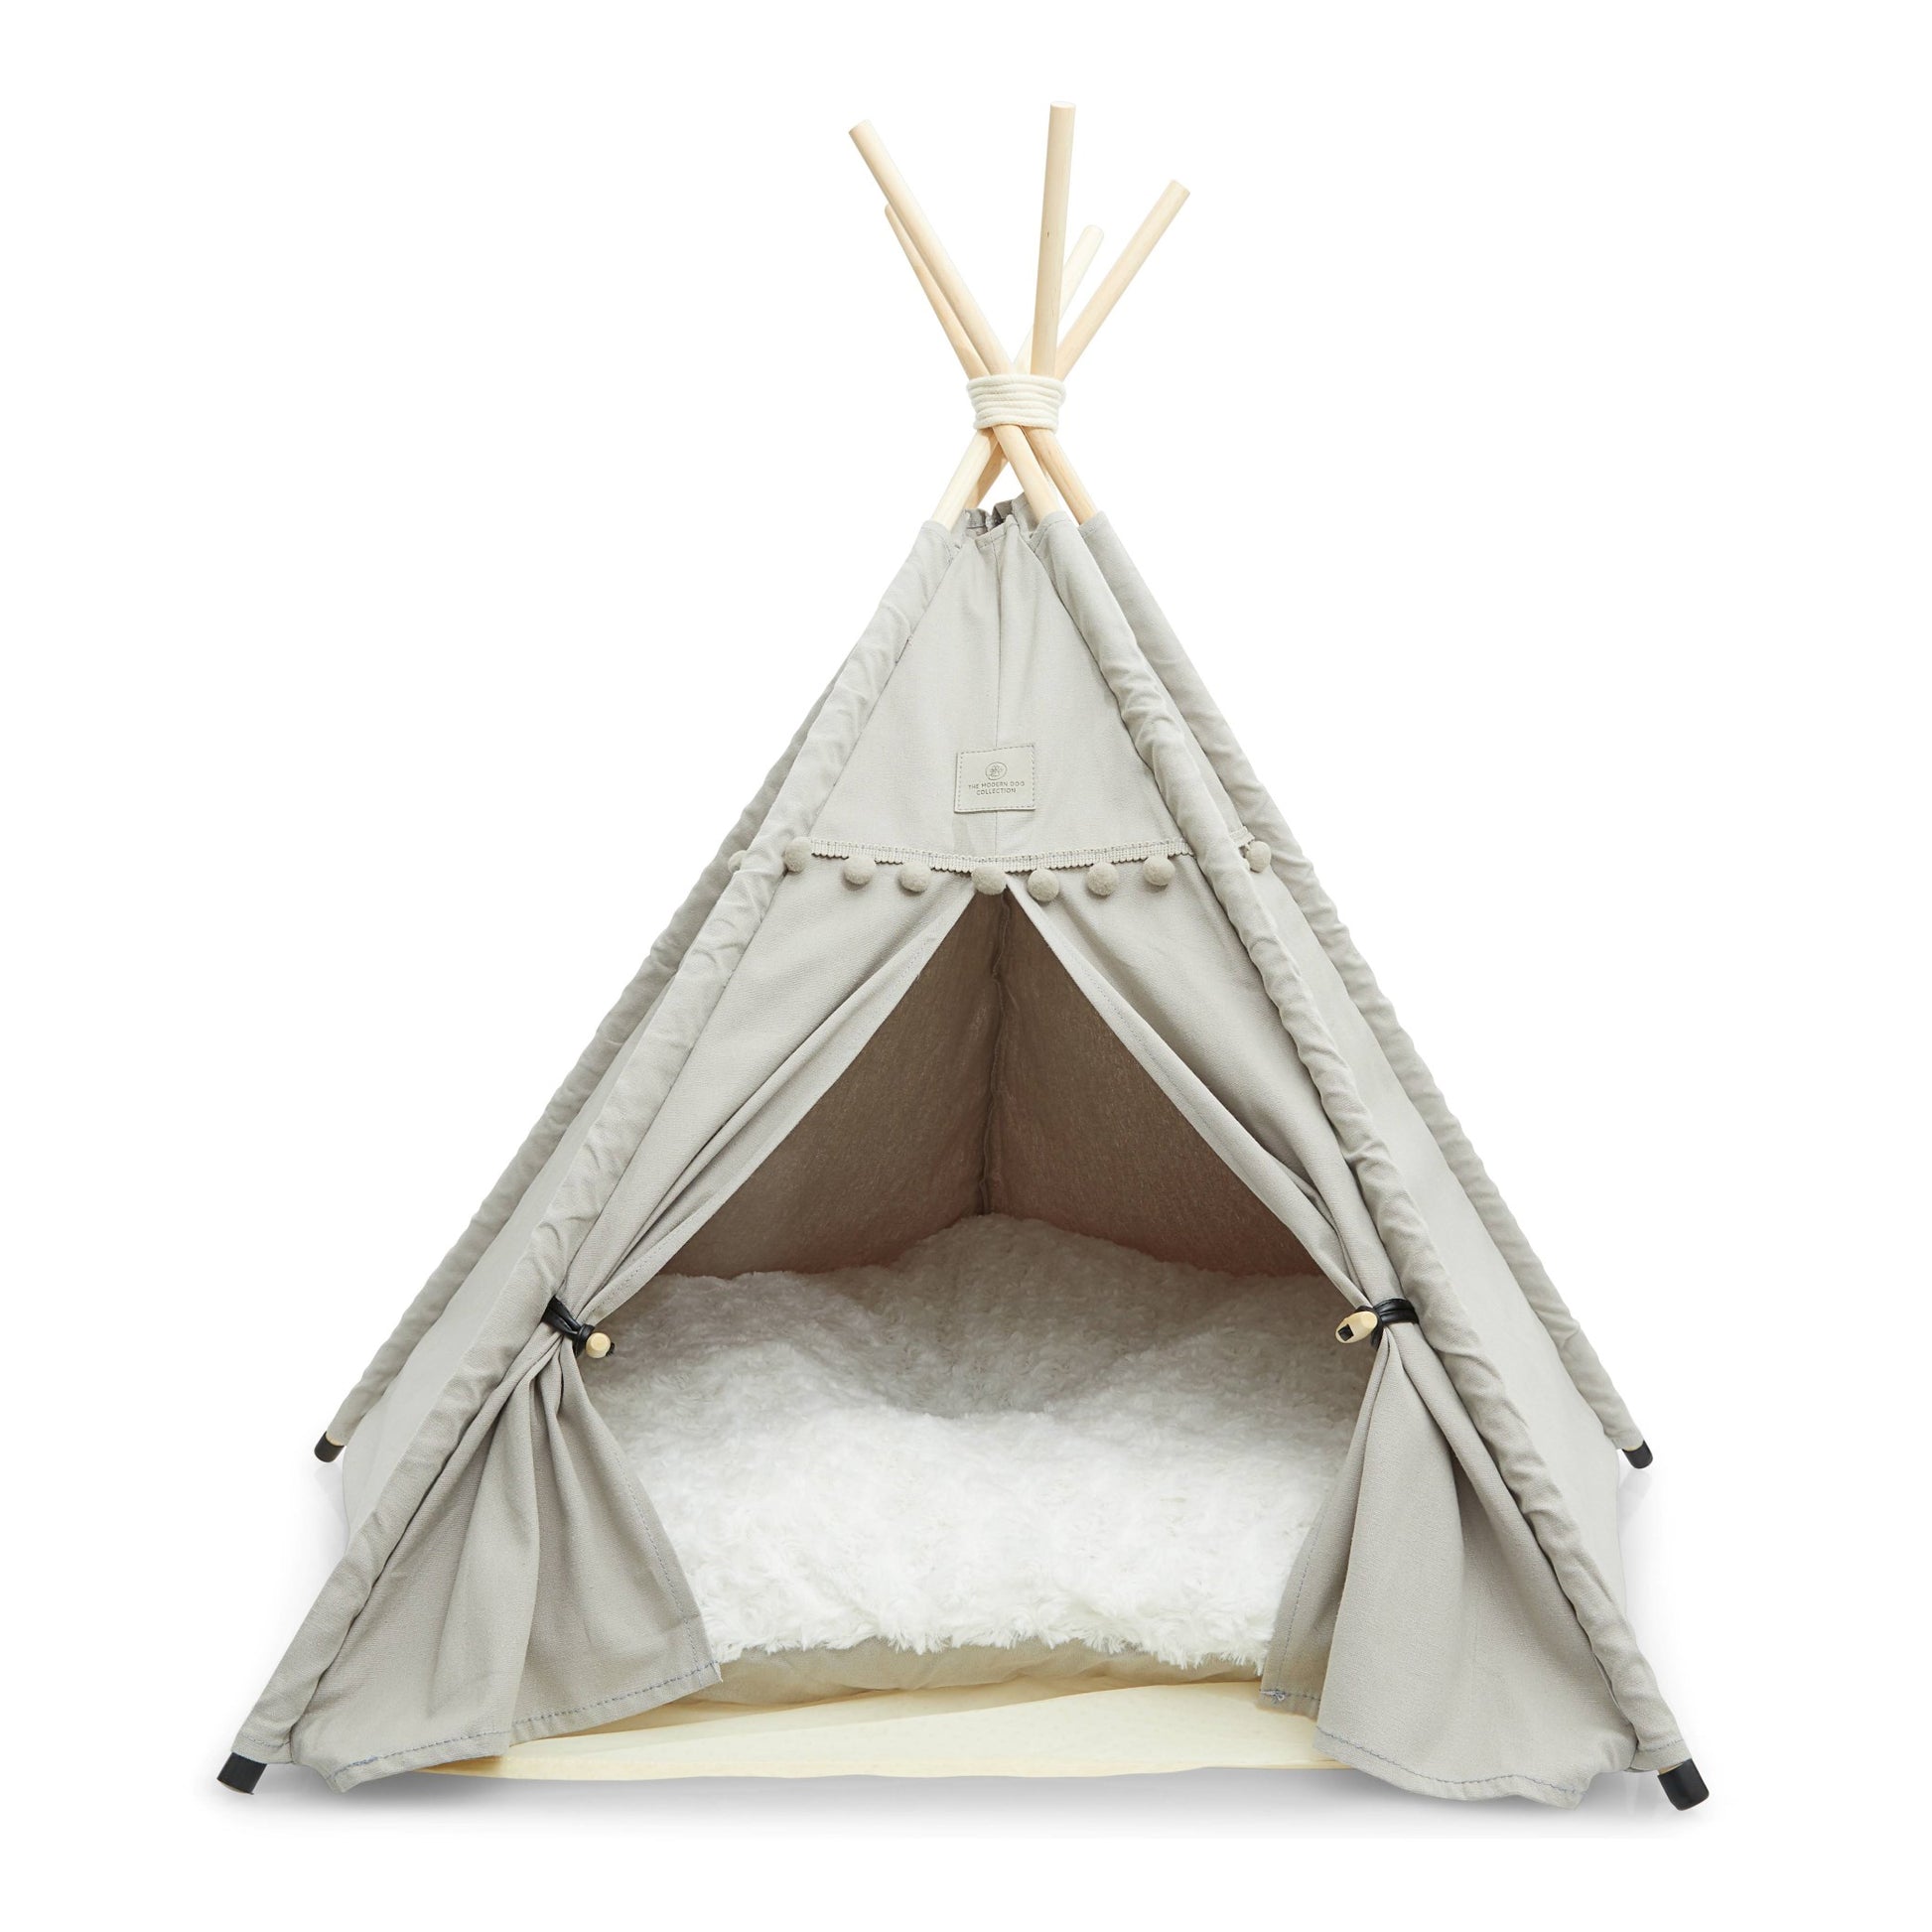 Denali teepee cat bed grey with thick, soft cushion, floor protectors, wooden poles, and tieback curtains.